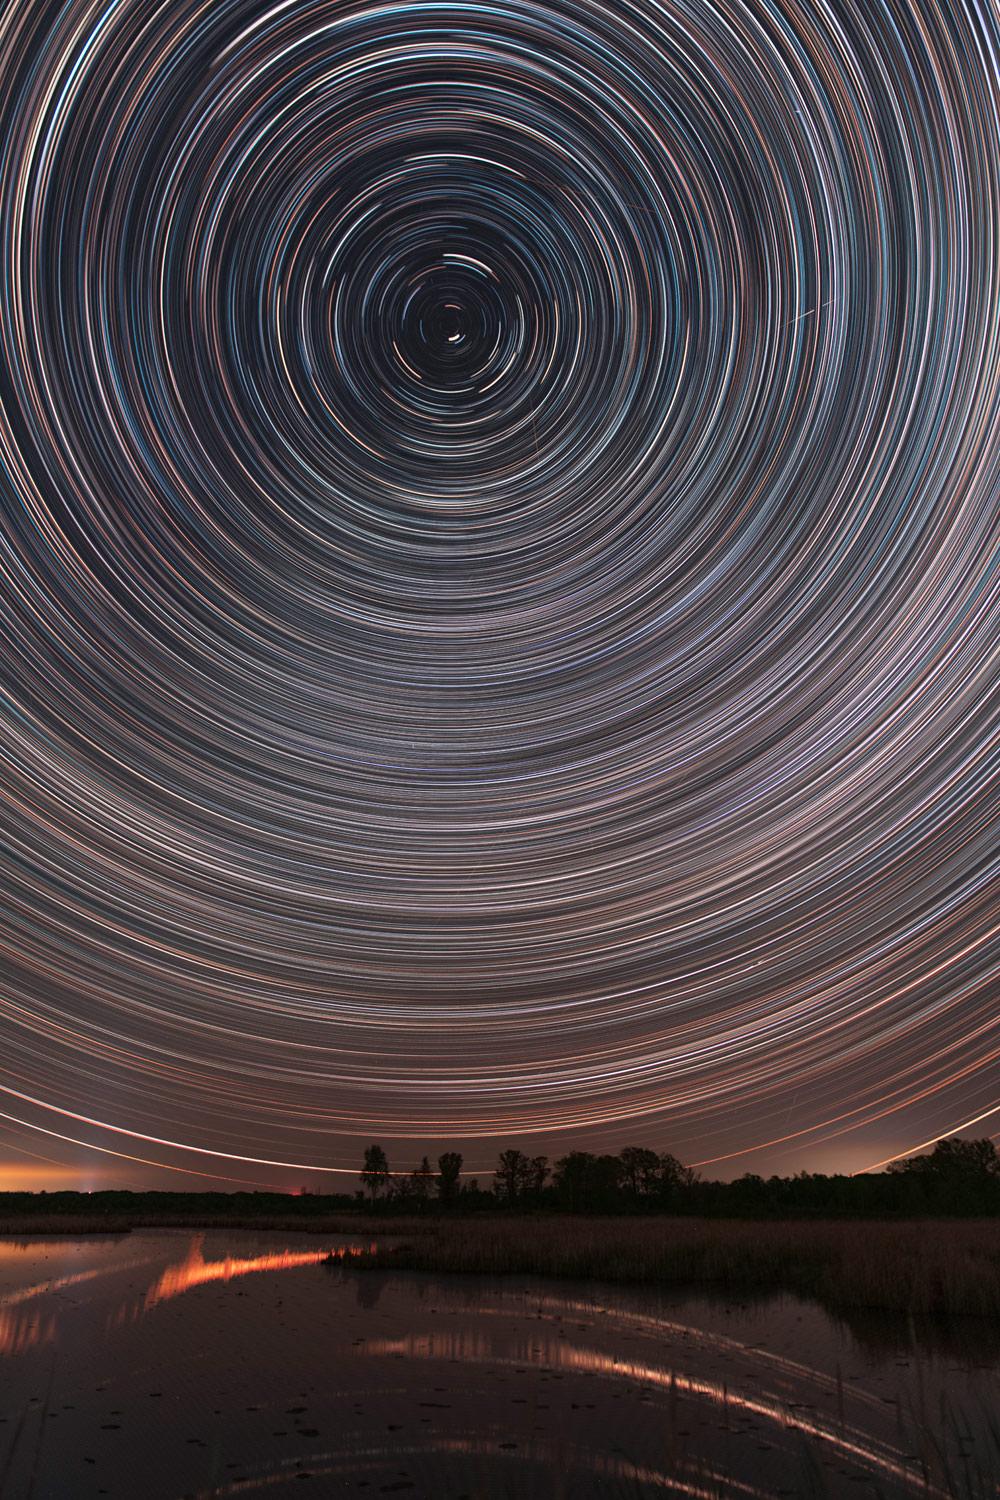 Many circular star trails over nighttime landscape